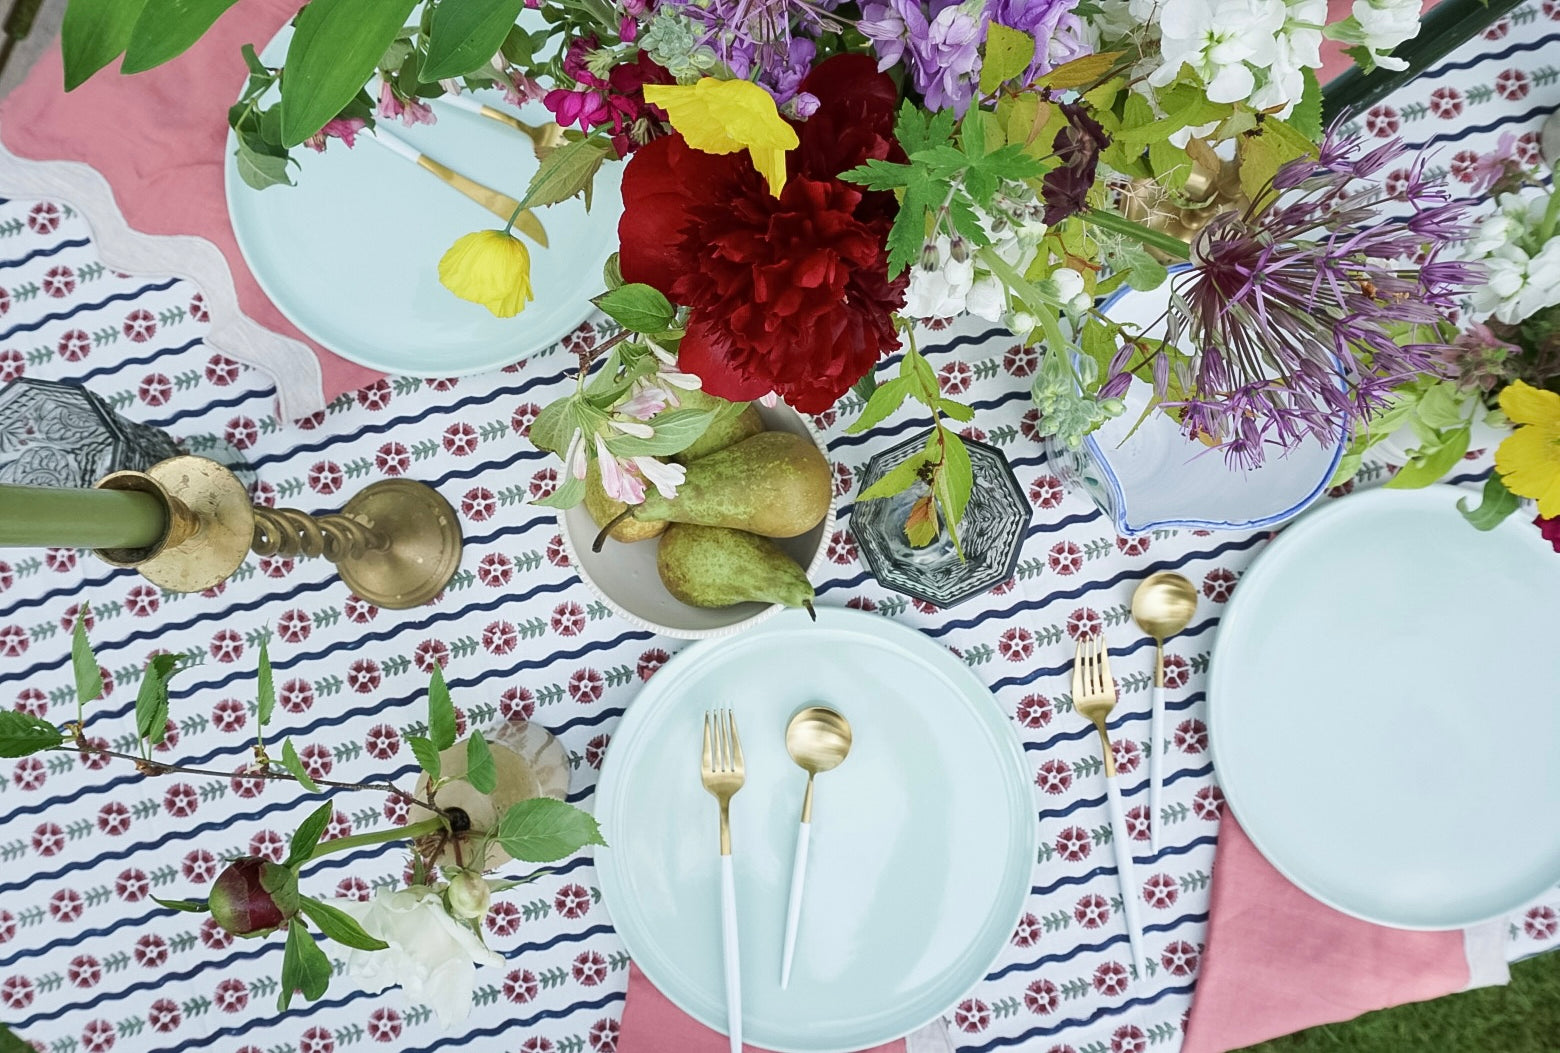 Load video: Setting the table with our block printed tablecloths 